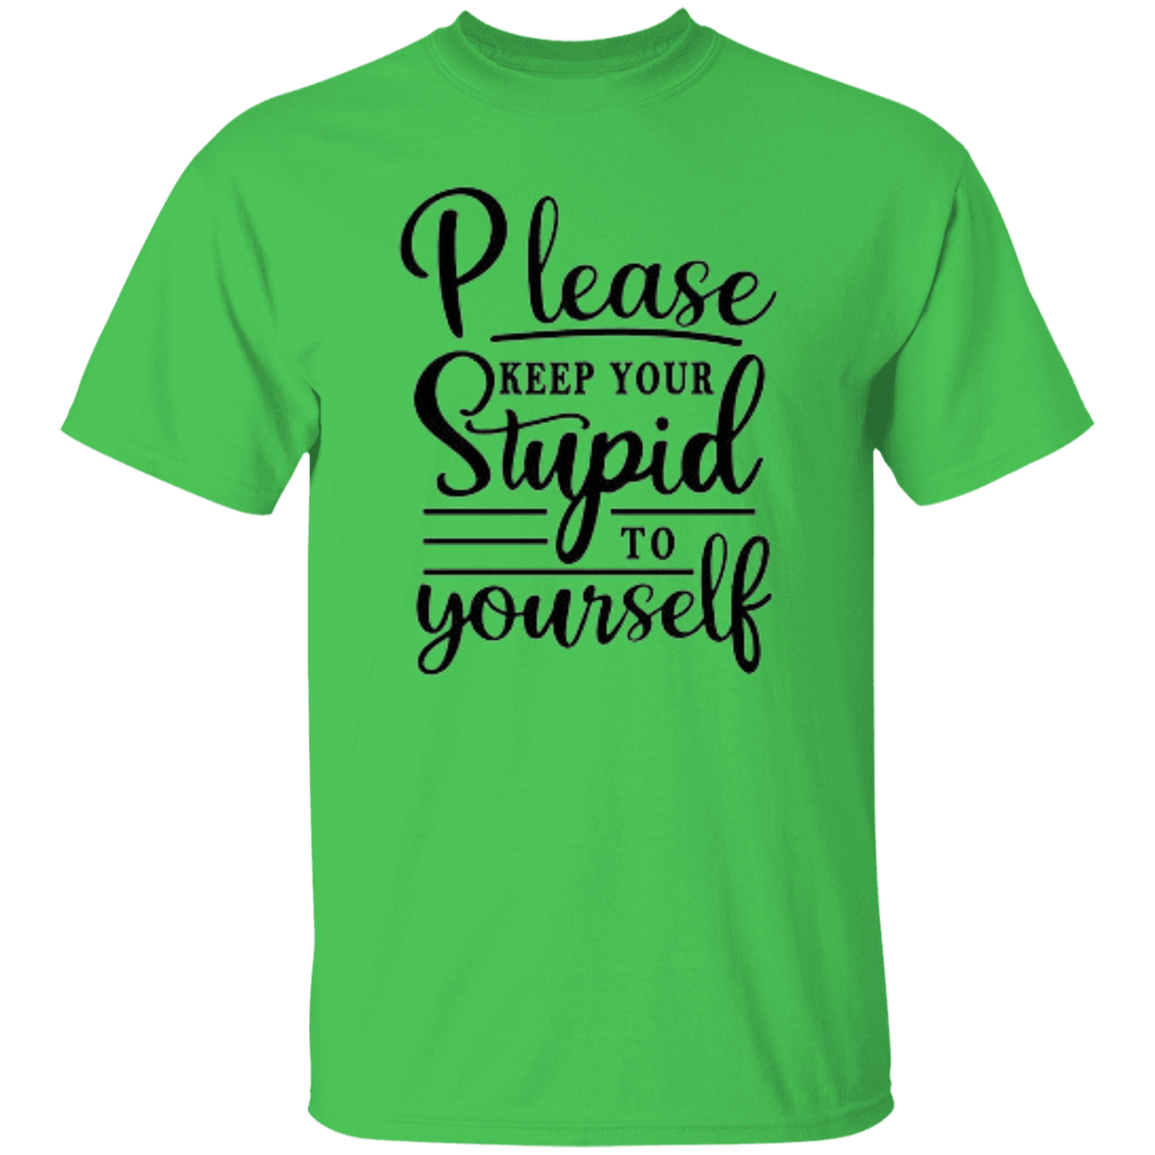 Please Keep Your Stupid To Yourself T-Shirt, Funny Quote Shirts, Feminist Shirt, Novelty T-shirt, Sarcastic T-shirt